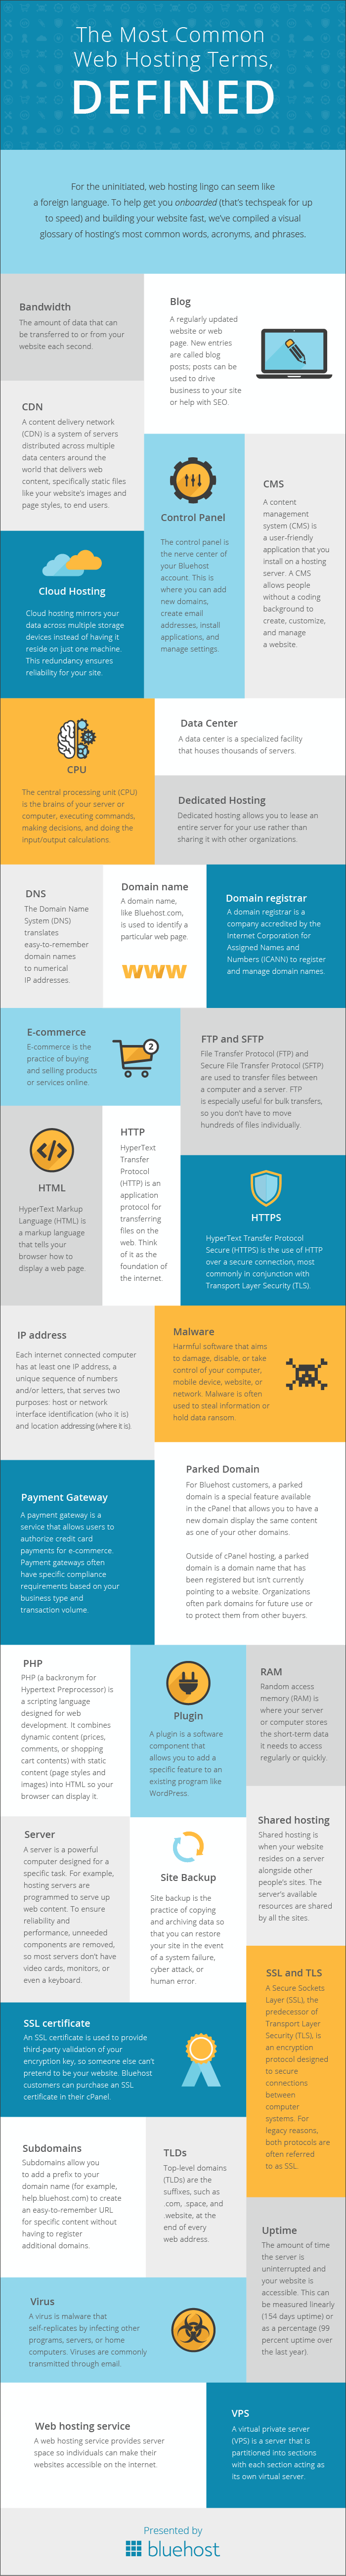 35 Common Web Hosting Terms, Defined - #infographic